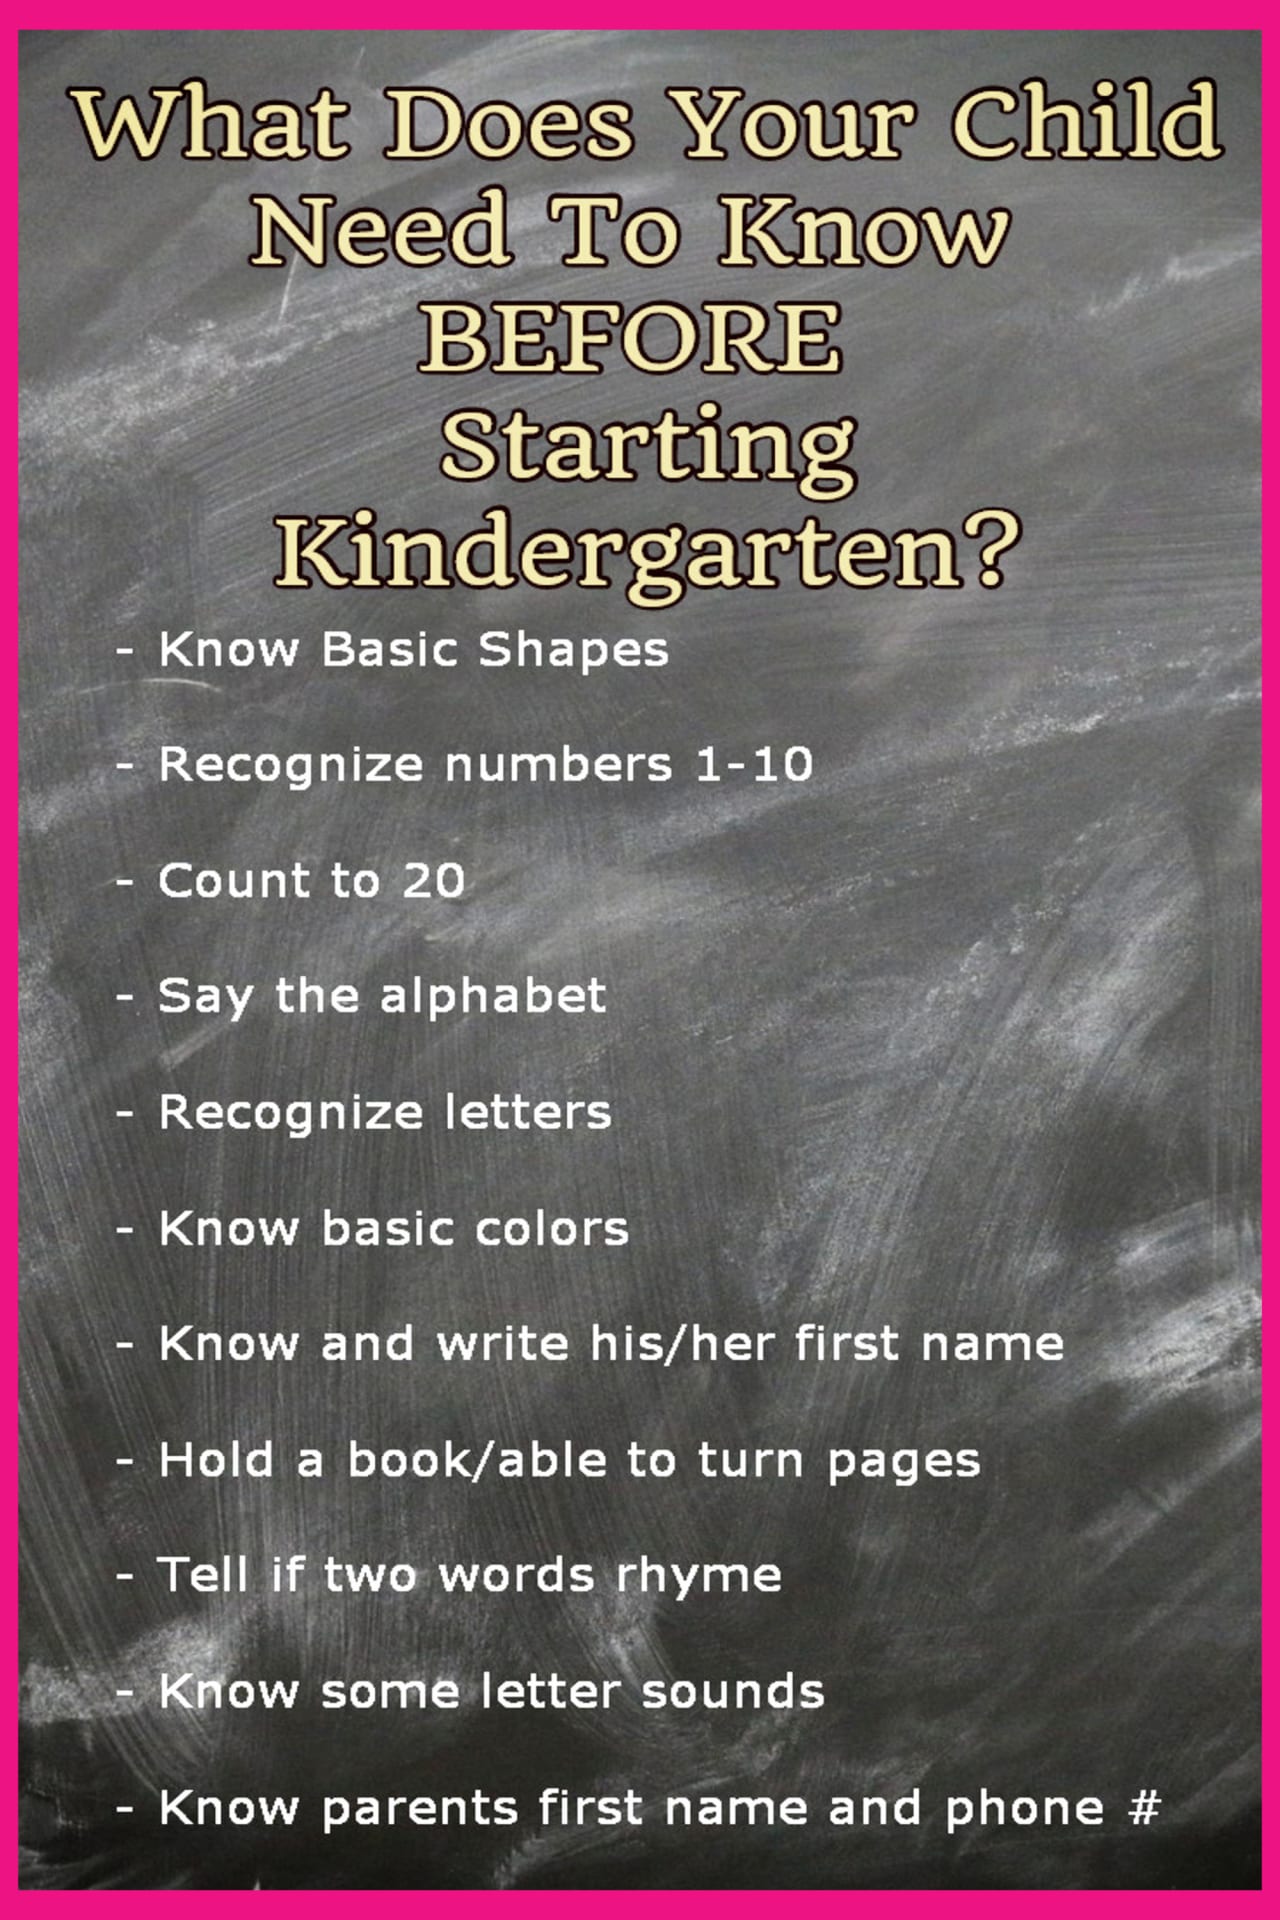 Getting Ready for Kindergarten Checklists!  Helpful kindergarten readiness worksheets, checklists, workbooks and kindergarten prep printables to help YOUR son or daughter get ready to start kindergarten.  This what kids NEED to know BEFORE starting kindergarten...